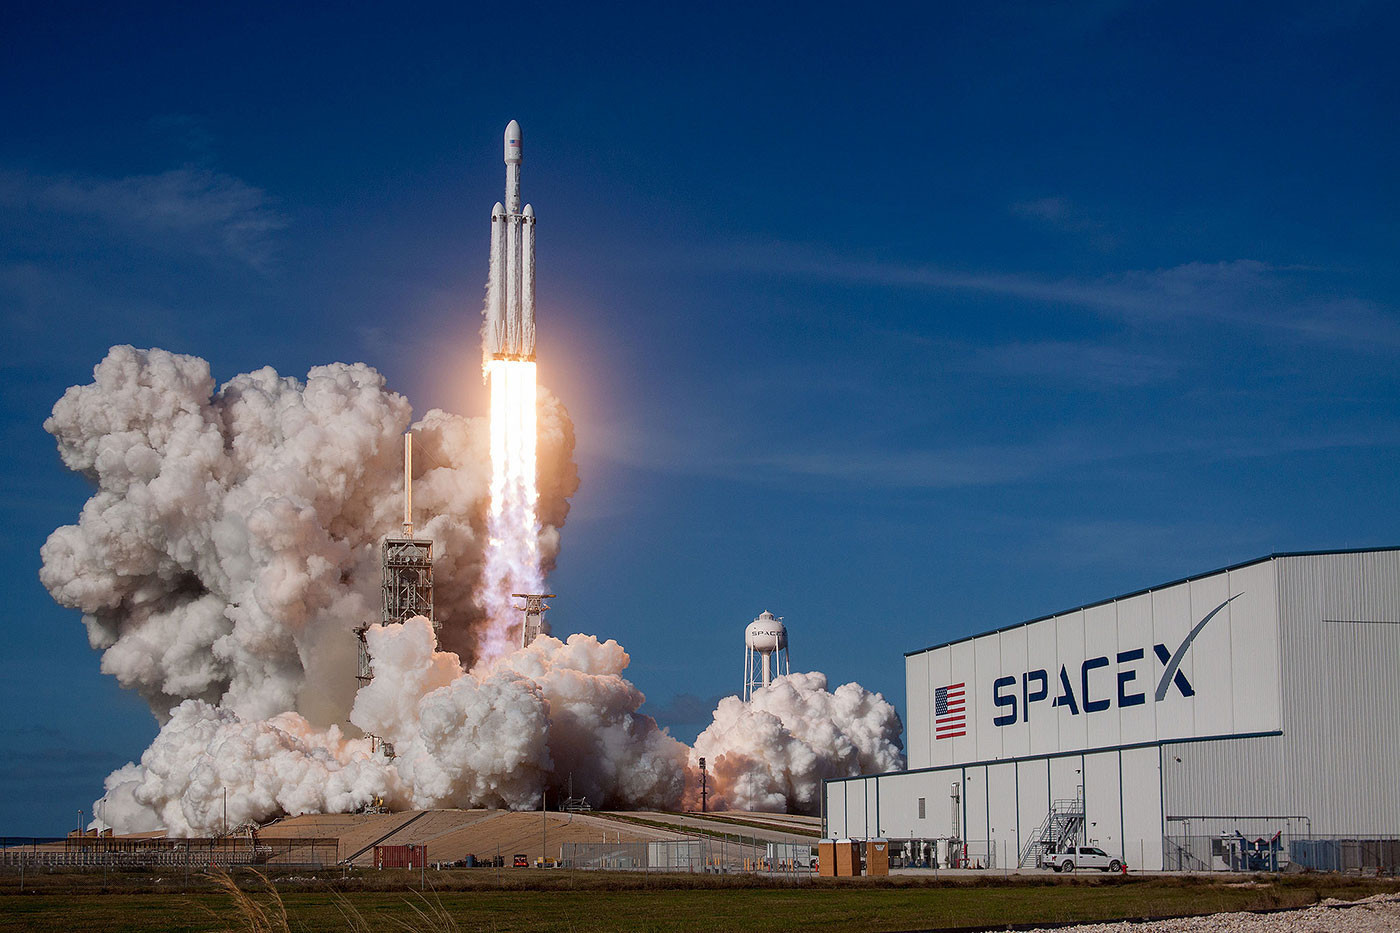 <p><span>Фото: &copy;&nbsp;</span><a href="https://www.flickr.com/photos/spacex/" title="Go to SpaceX's photostream" data-track="attributionNameClick" data-rapid_p="49">SpaceX</a></p>